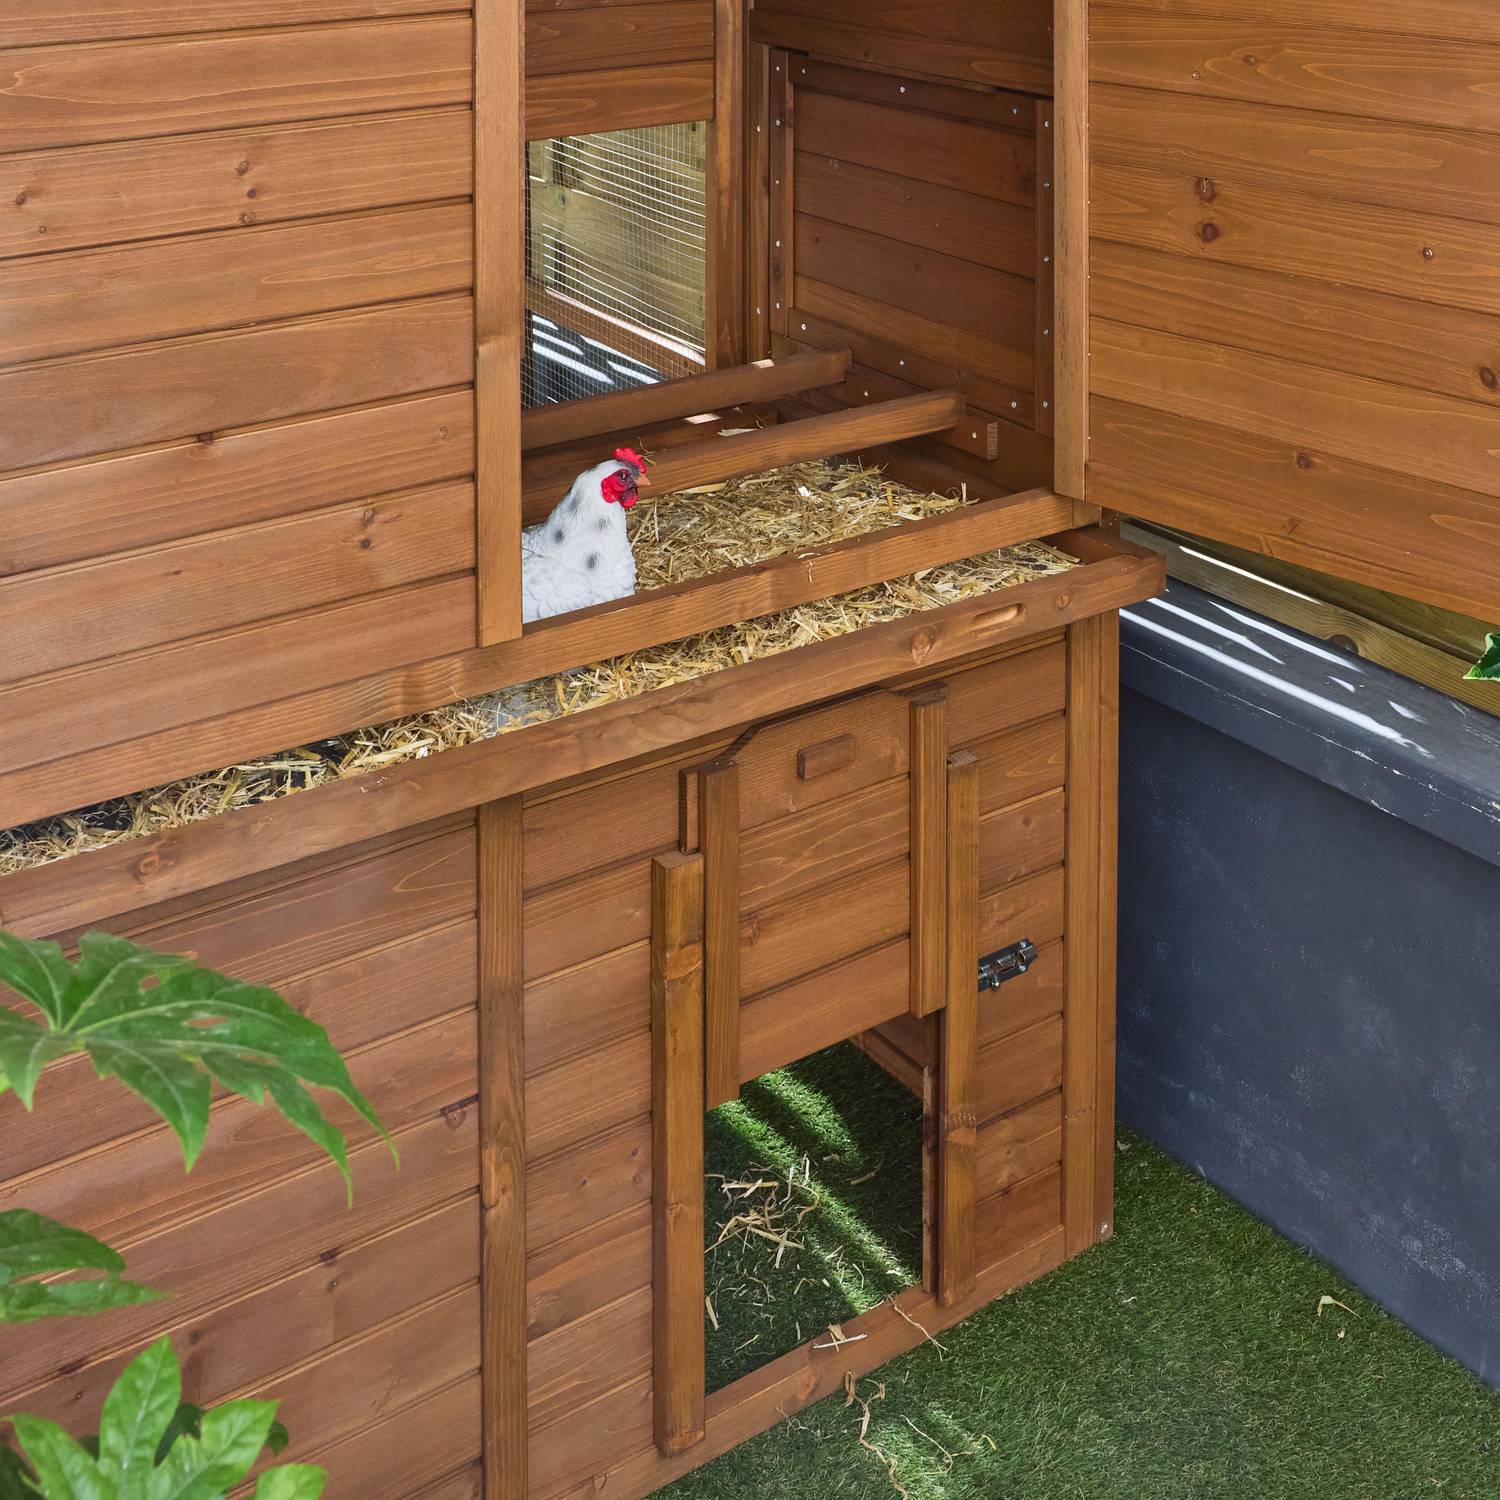 Wooden chicken coop - backyard hen cage for 6 to 8 chickens, indoor and outdoor space - Cotentine - Wood colour Photo2